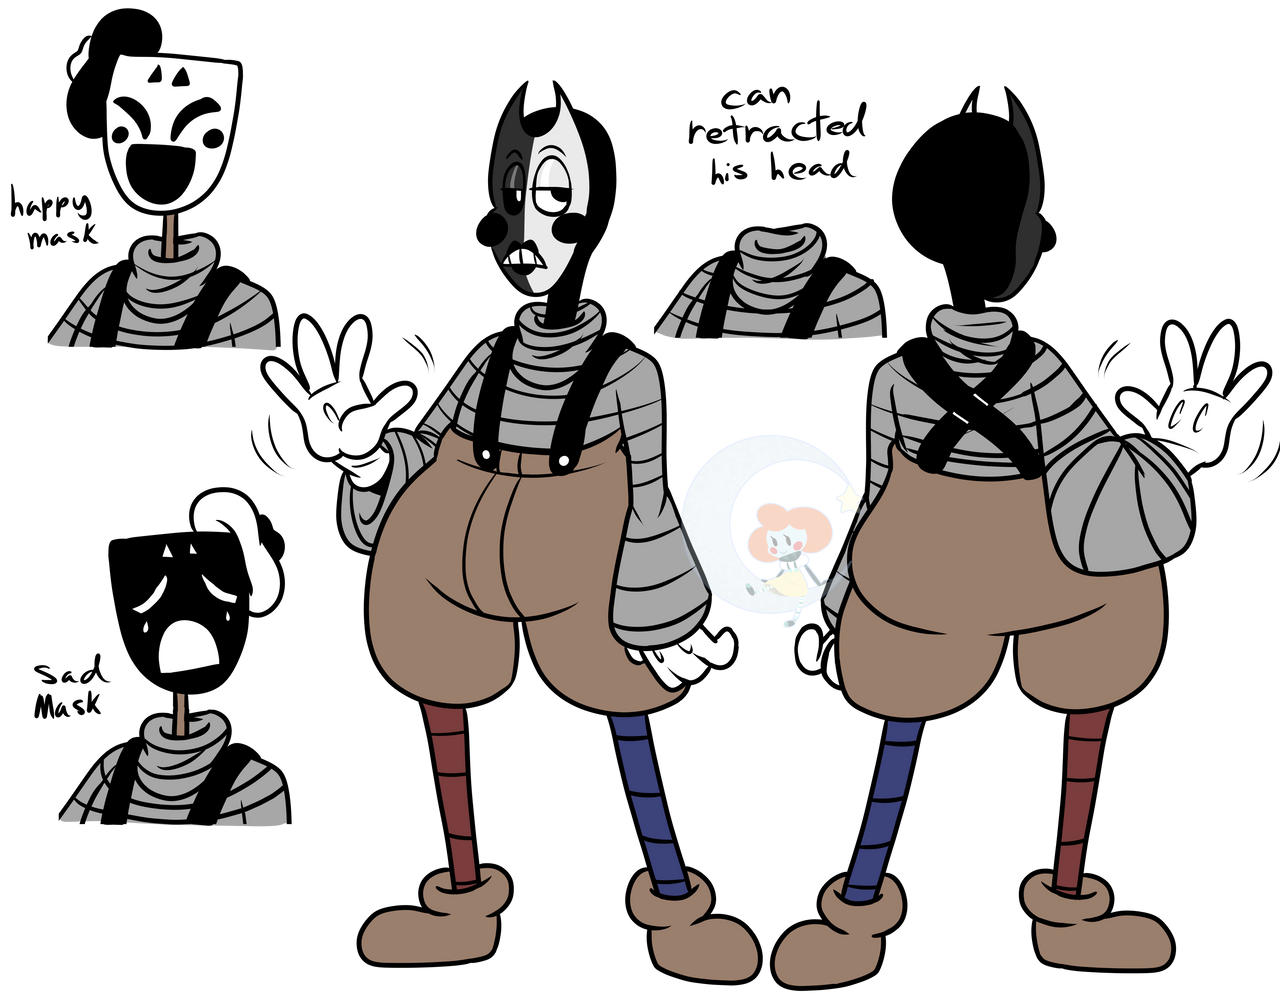 Avatar I've been working on - Mask Guy from Mime and Dash by